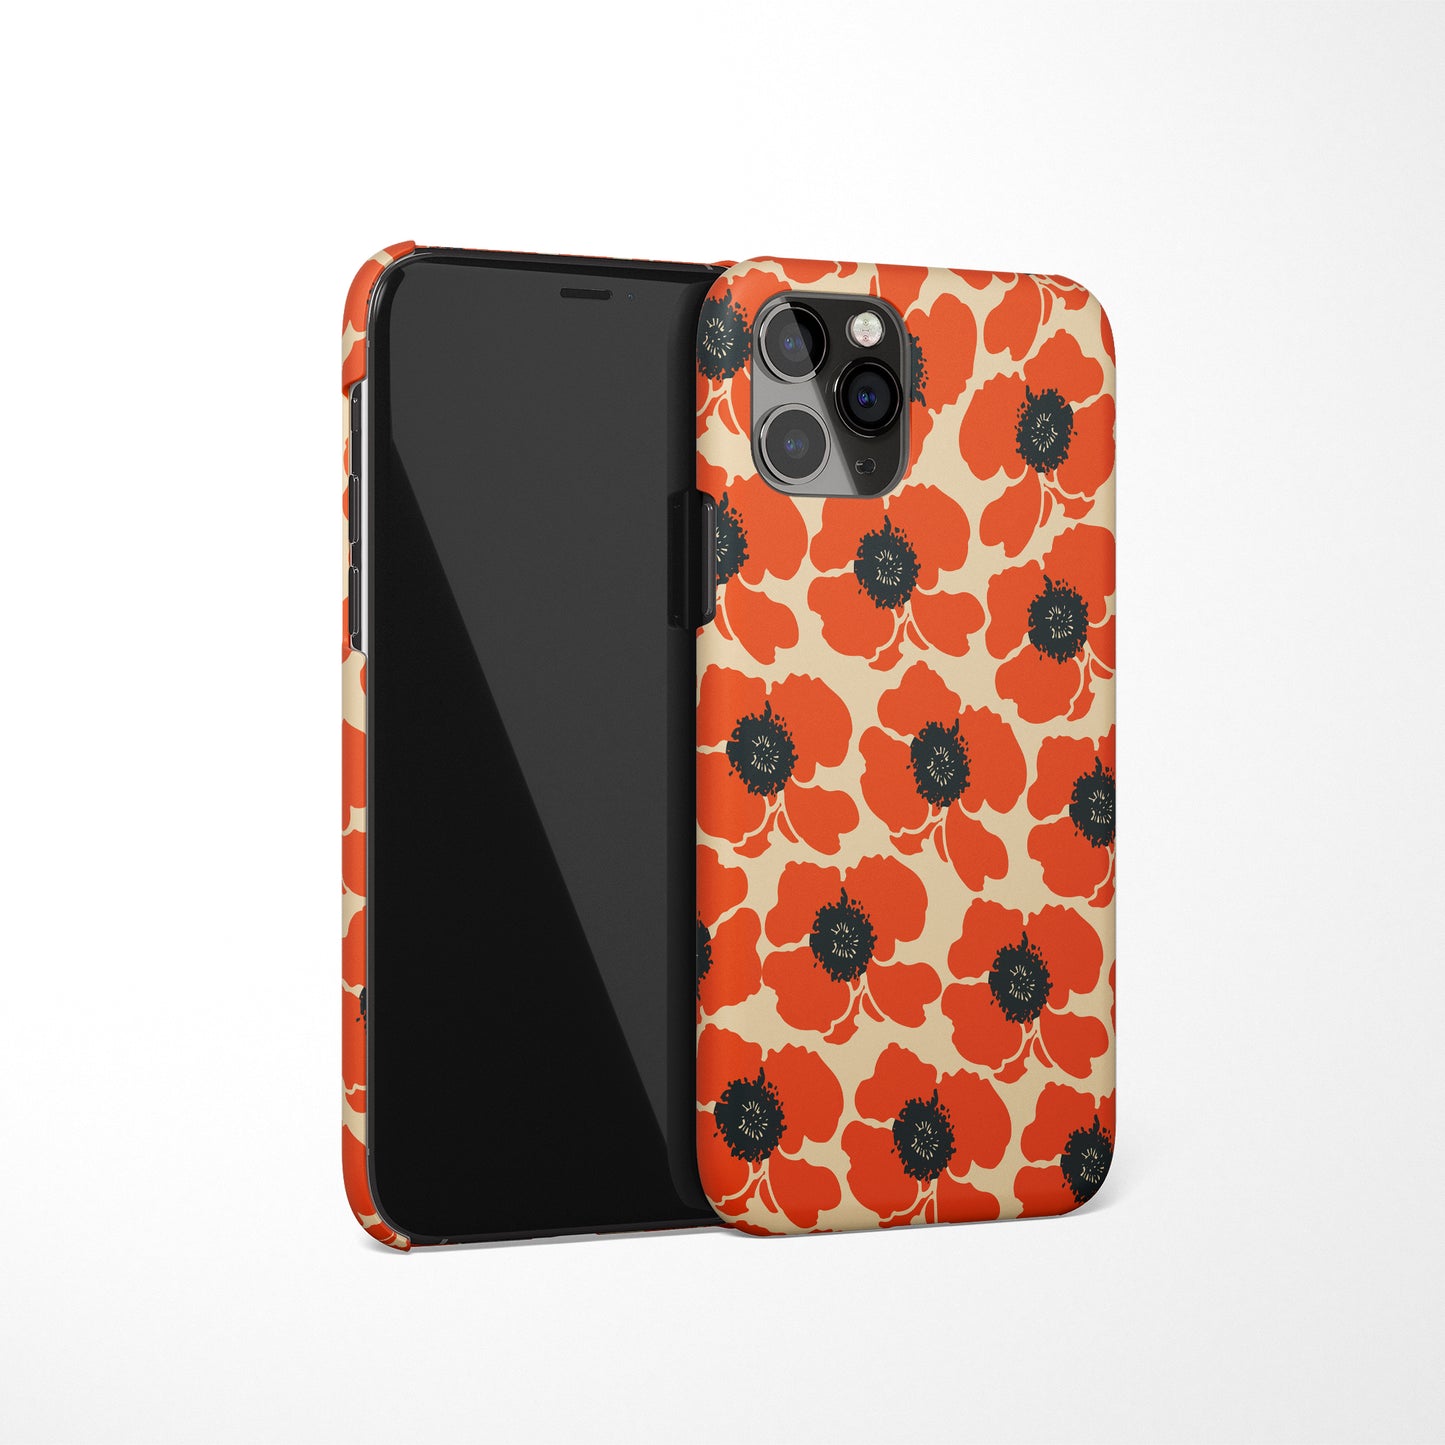 iPhone Case with Vintage Poppies Print